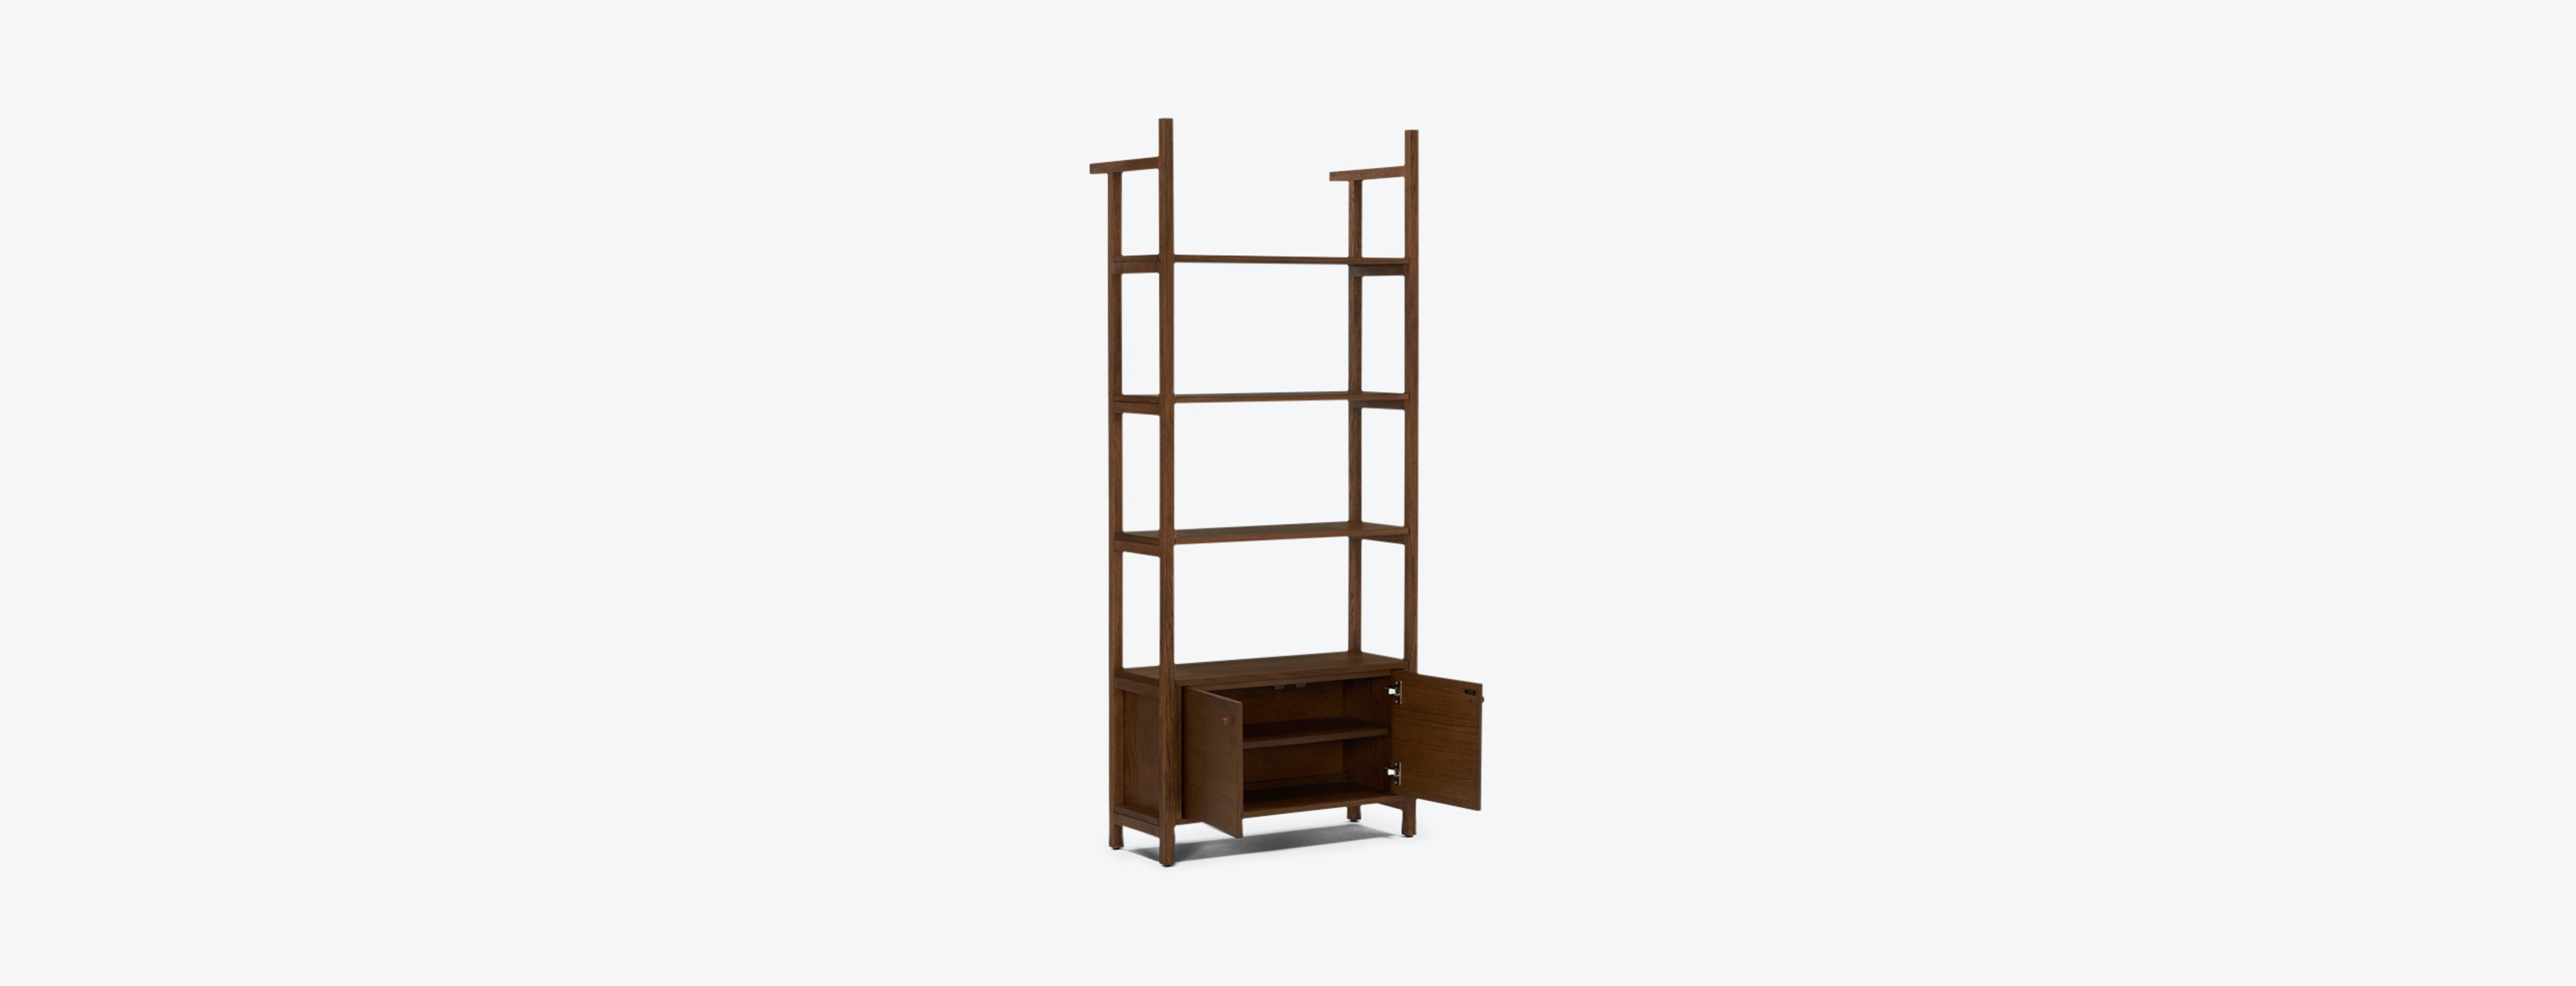 Bevan Bookshelf with Cabinet - DISCONTINUED - Image 1